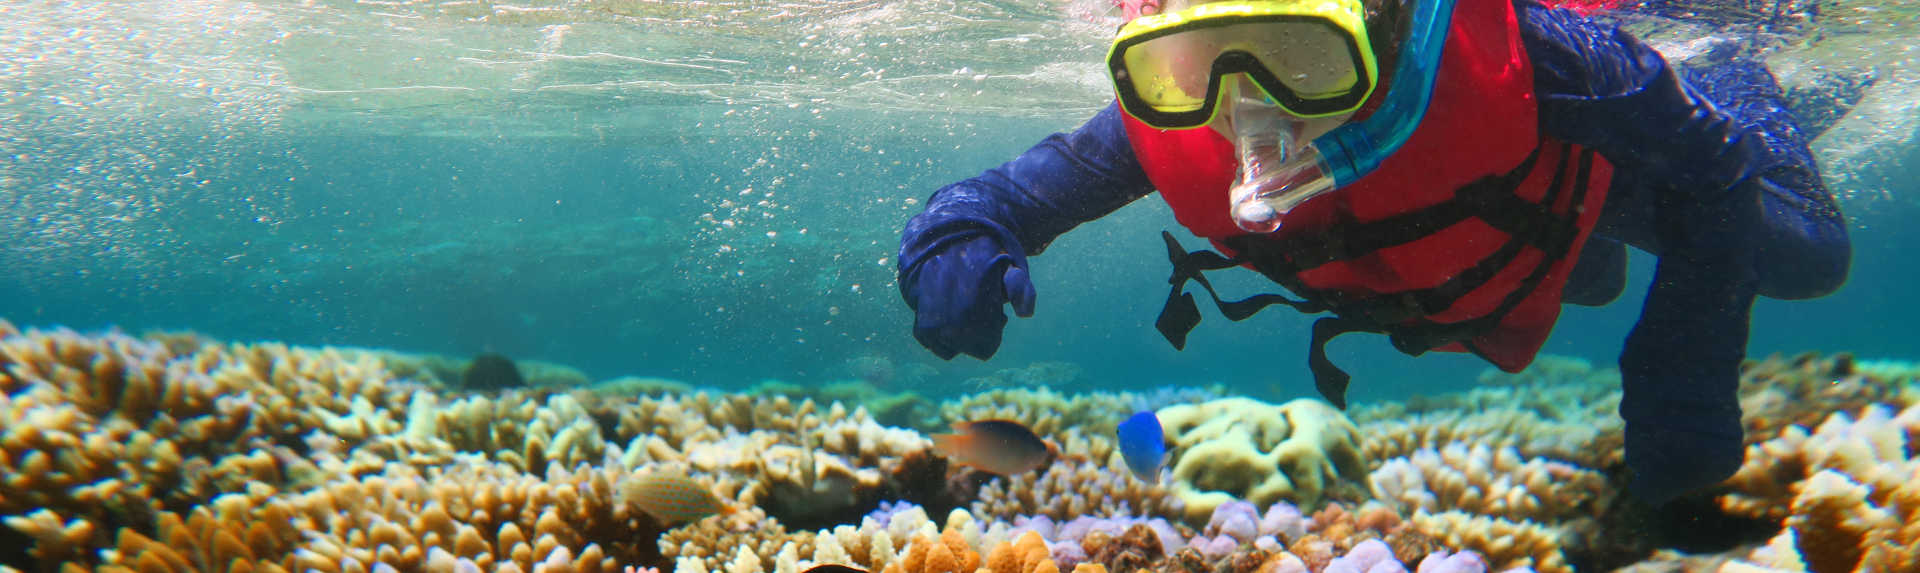 Is it safe to snorkel the Great Barrier Reef?